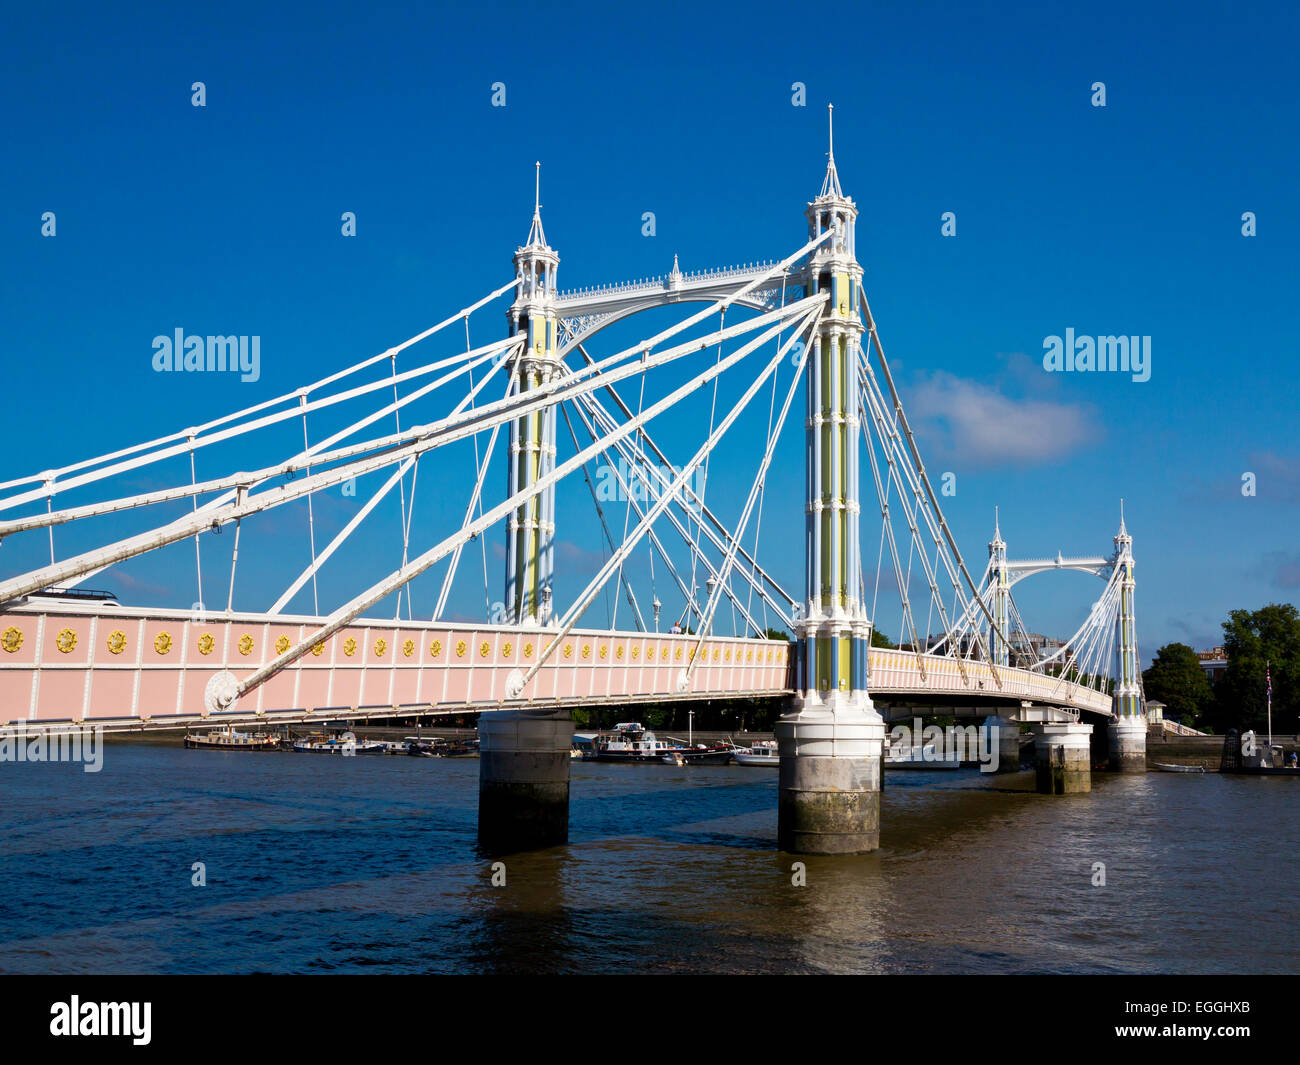 Albert Bridge in central London connecting Chelsea and Battersea designed by Rowland Mason Ordish 1873 Stock Photo